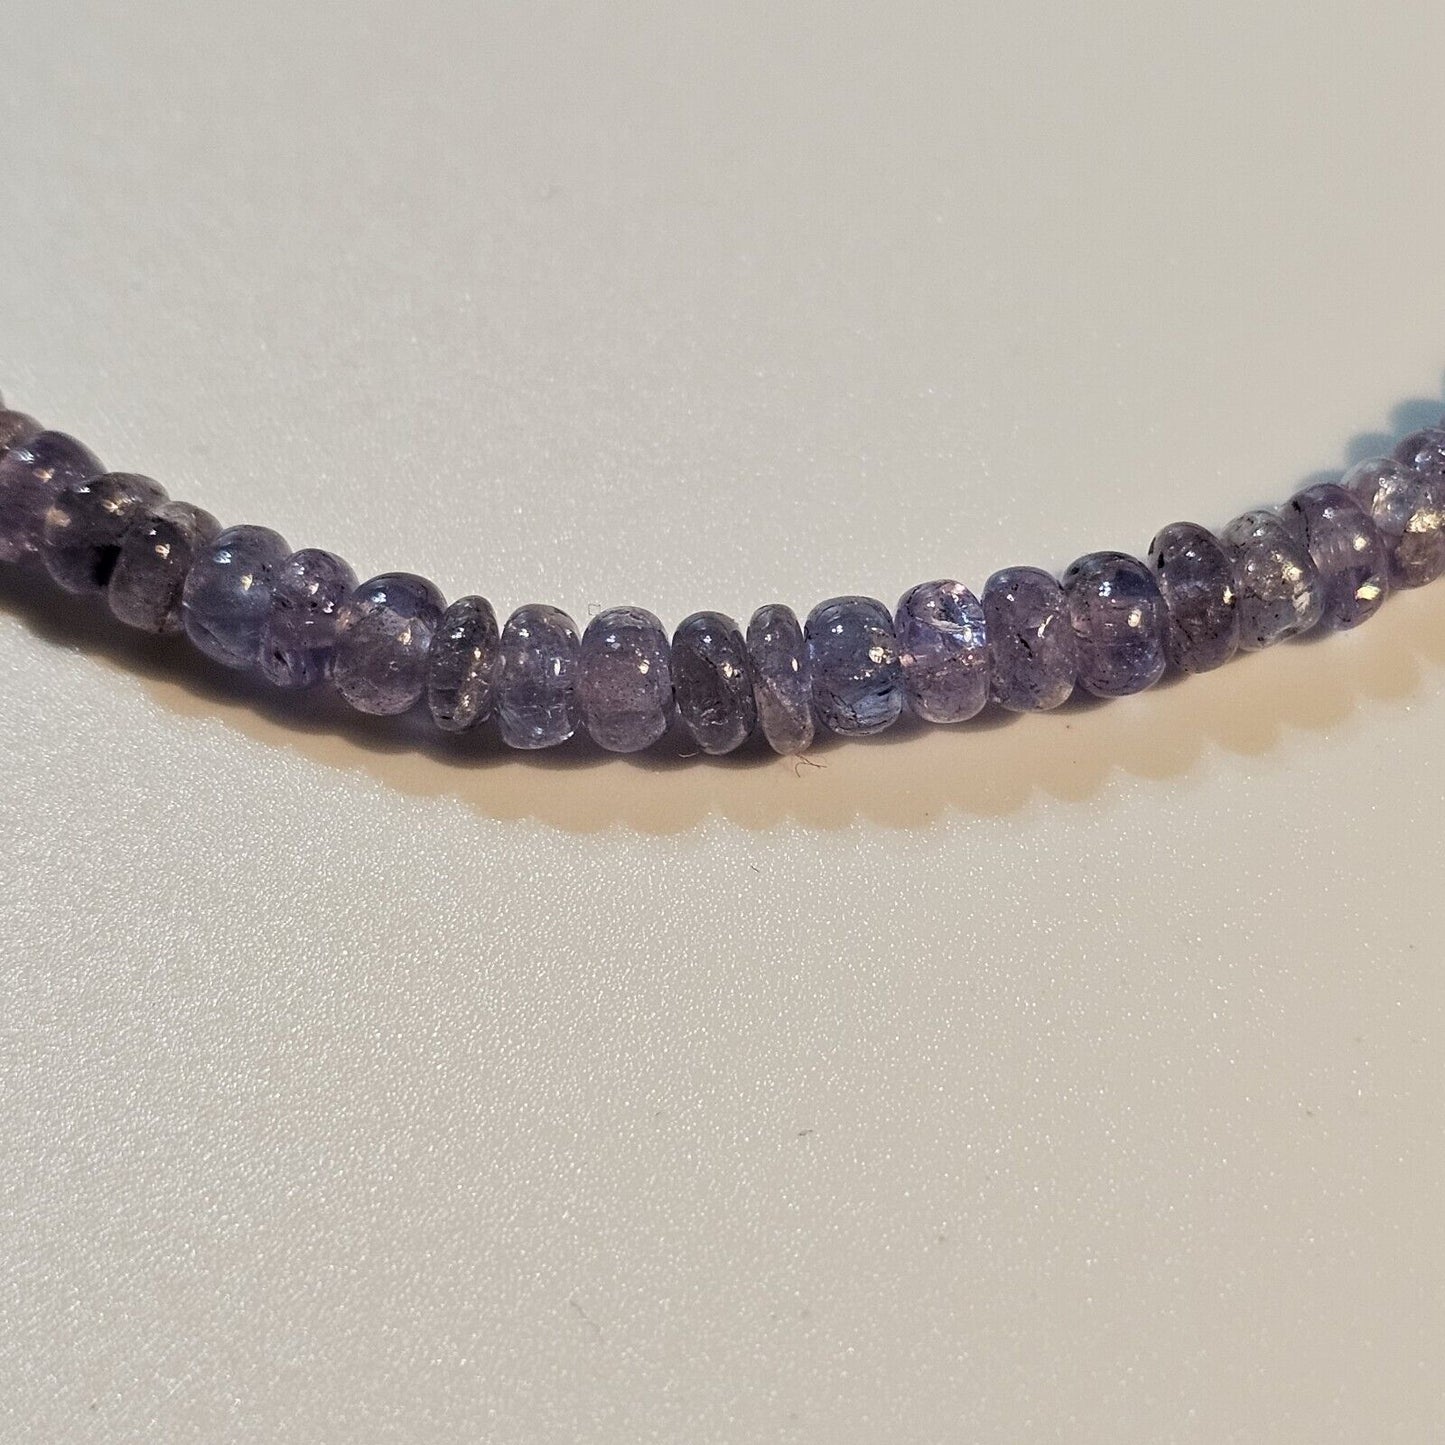 Genuine Tanzanite 925 Sterling Silver Bracelet with Magnetic Clasp 7.5"